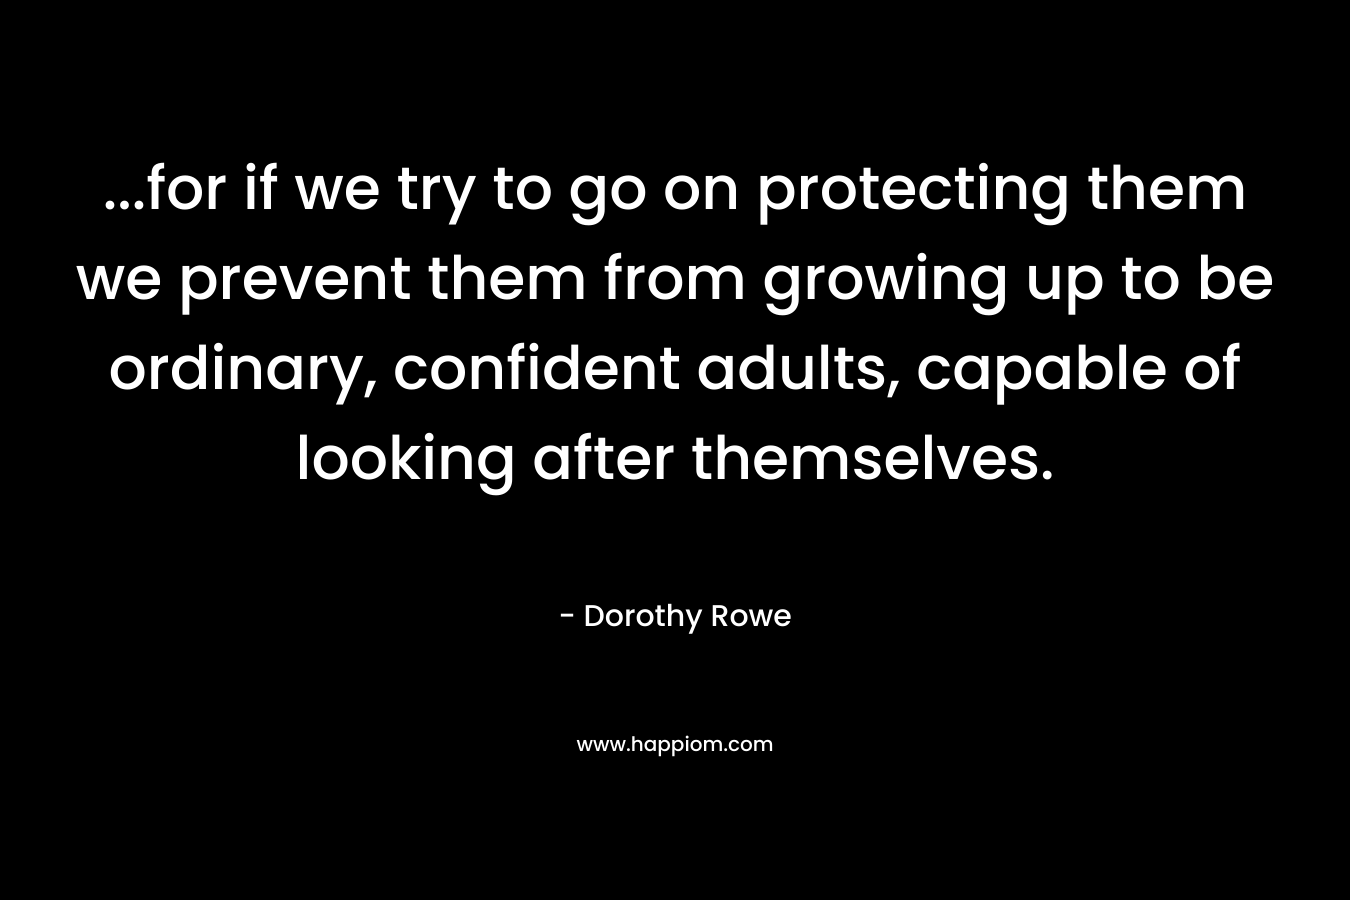 …for if we try to go on protecting them we prevent them from growing up to be ordinary, confident adults, capable of looking after themselves. – Dorothy Rowe